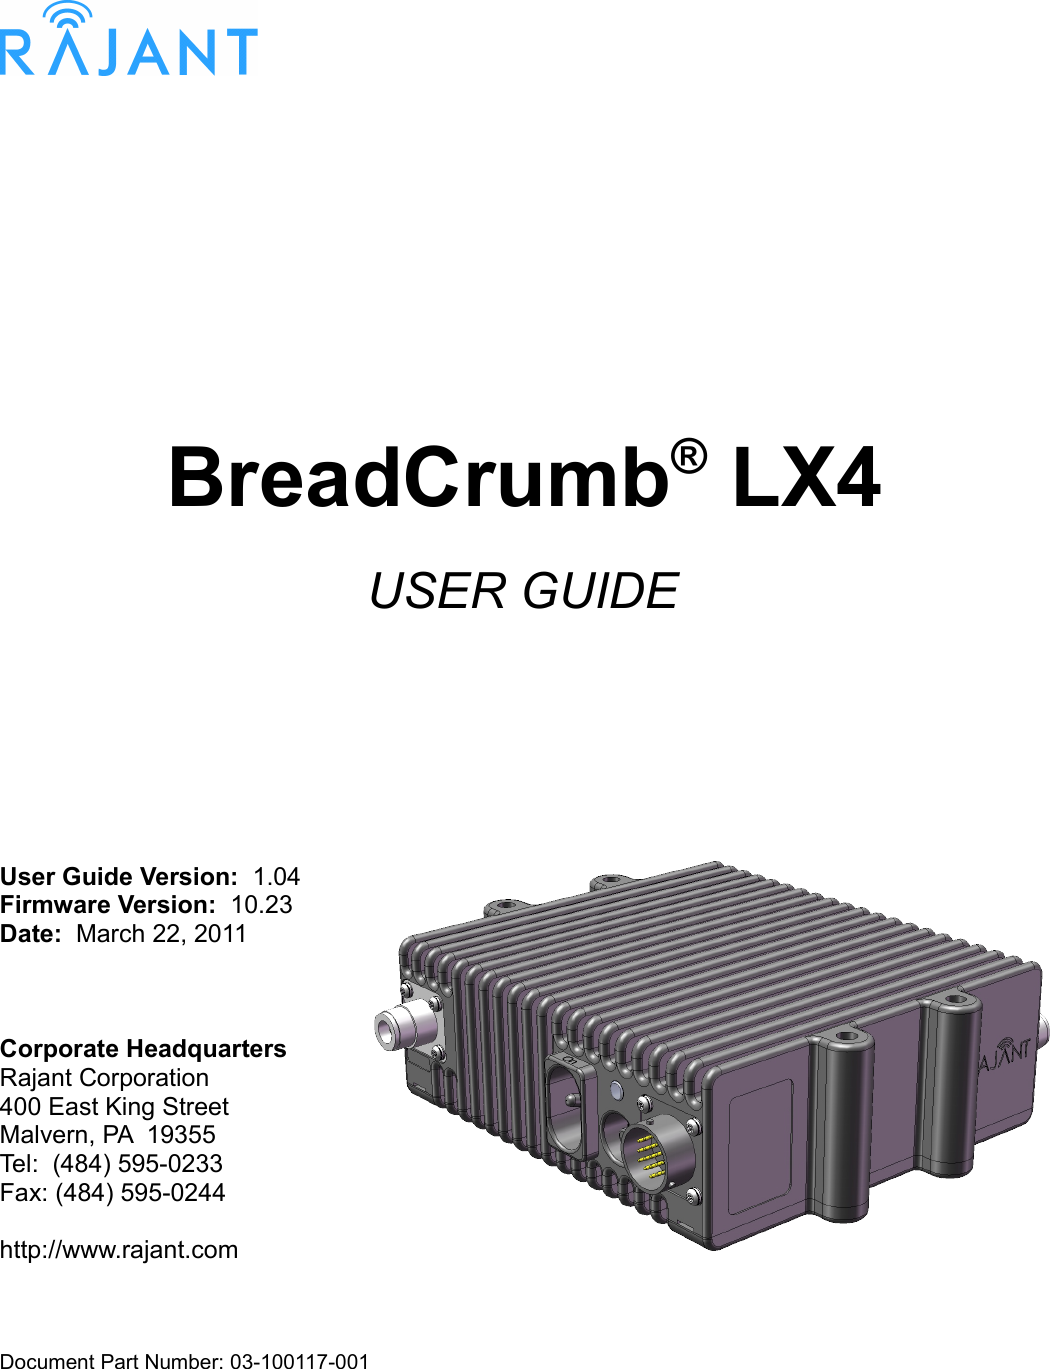 BreadCrumb® LX4USER GUIDEUser Guide Version:  1.04Firmware Version:  10.23Date:  March 22, 2011Corporate HeadquartersRajant Corporation400 East King StreetMalvern, PA  19355Tel:  (484) 595-0233Fax: (484) 595-0244http://www.rajant.comDocument Part Number: 03-100117-001